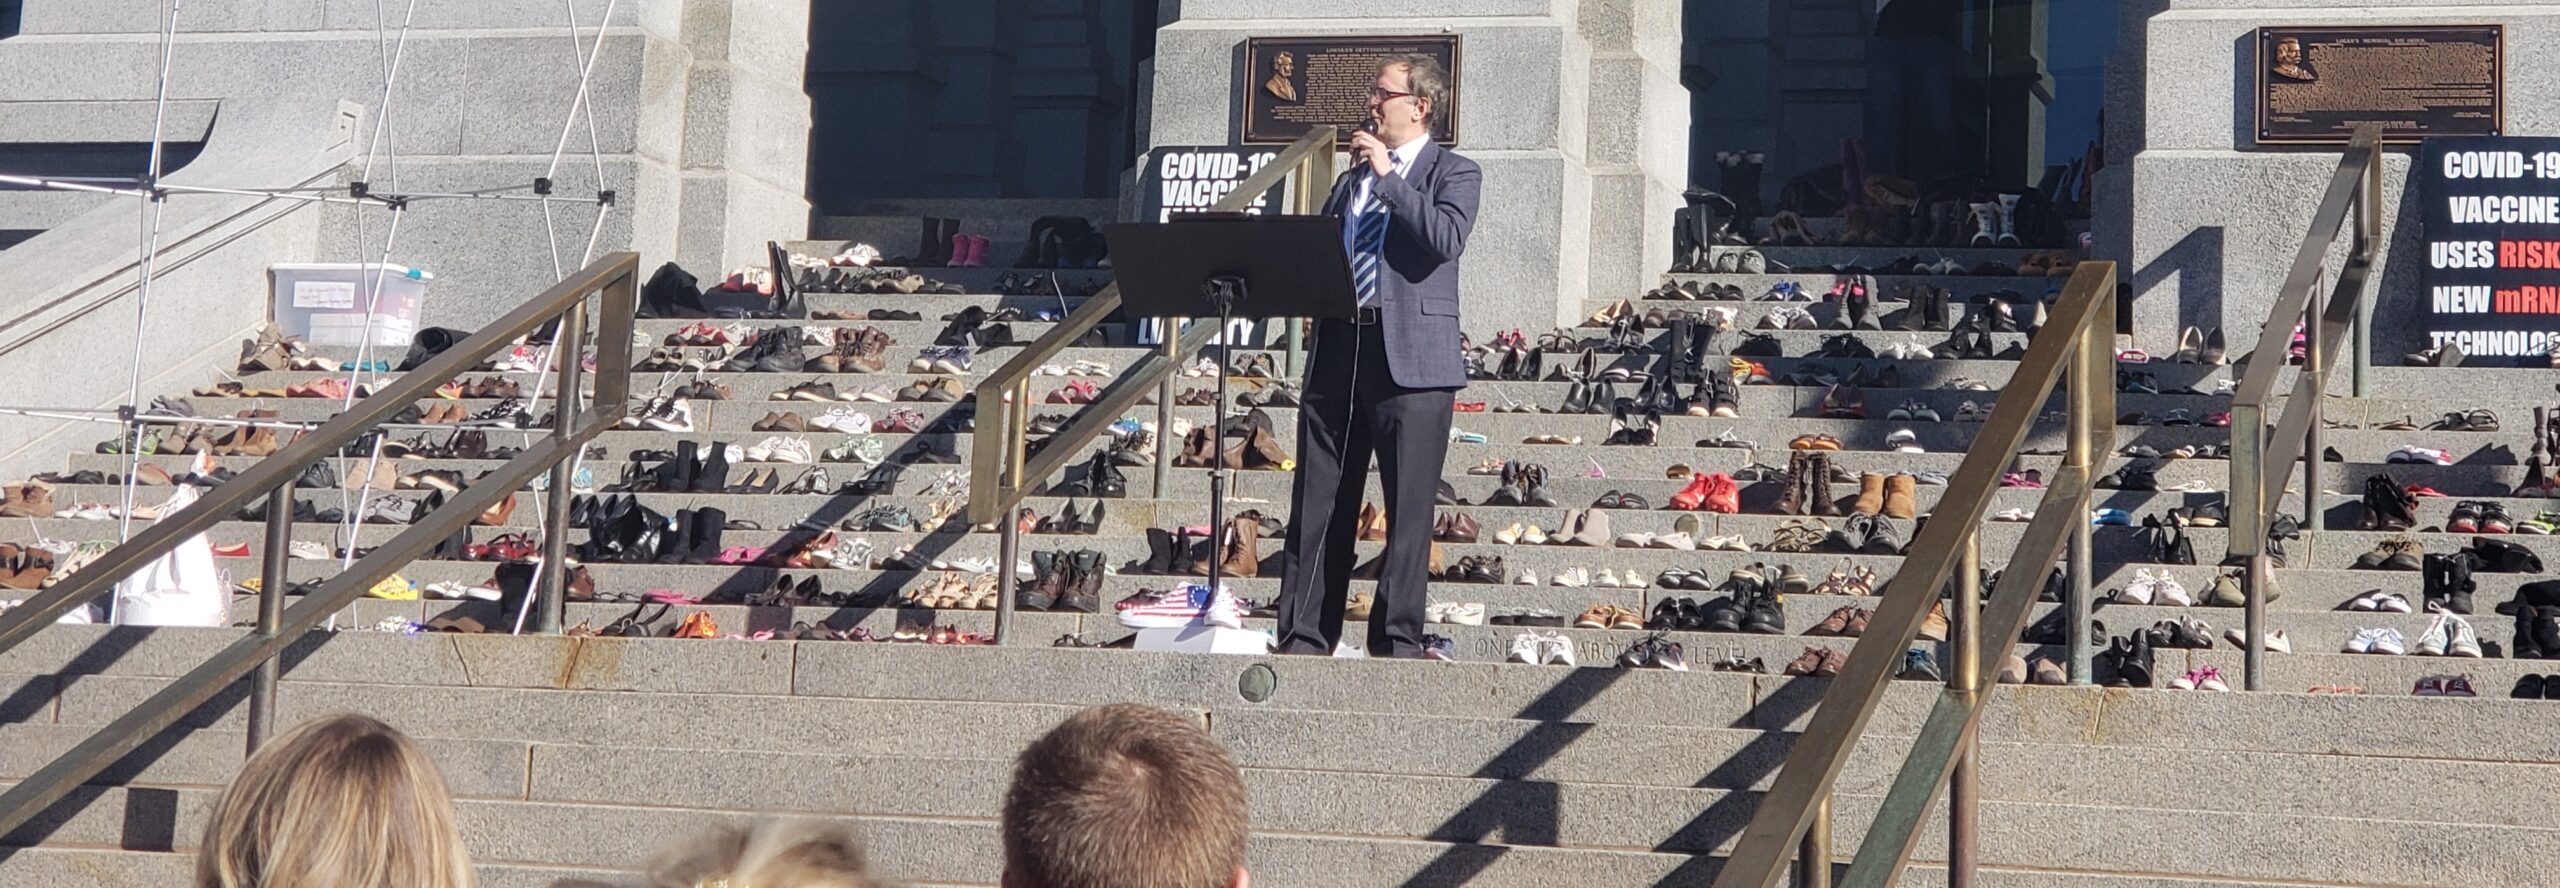 MG Speaks at CO Capitol Rally 1-23-22 - 1